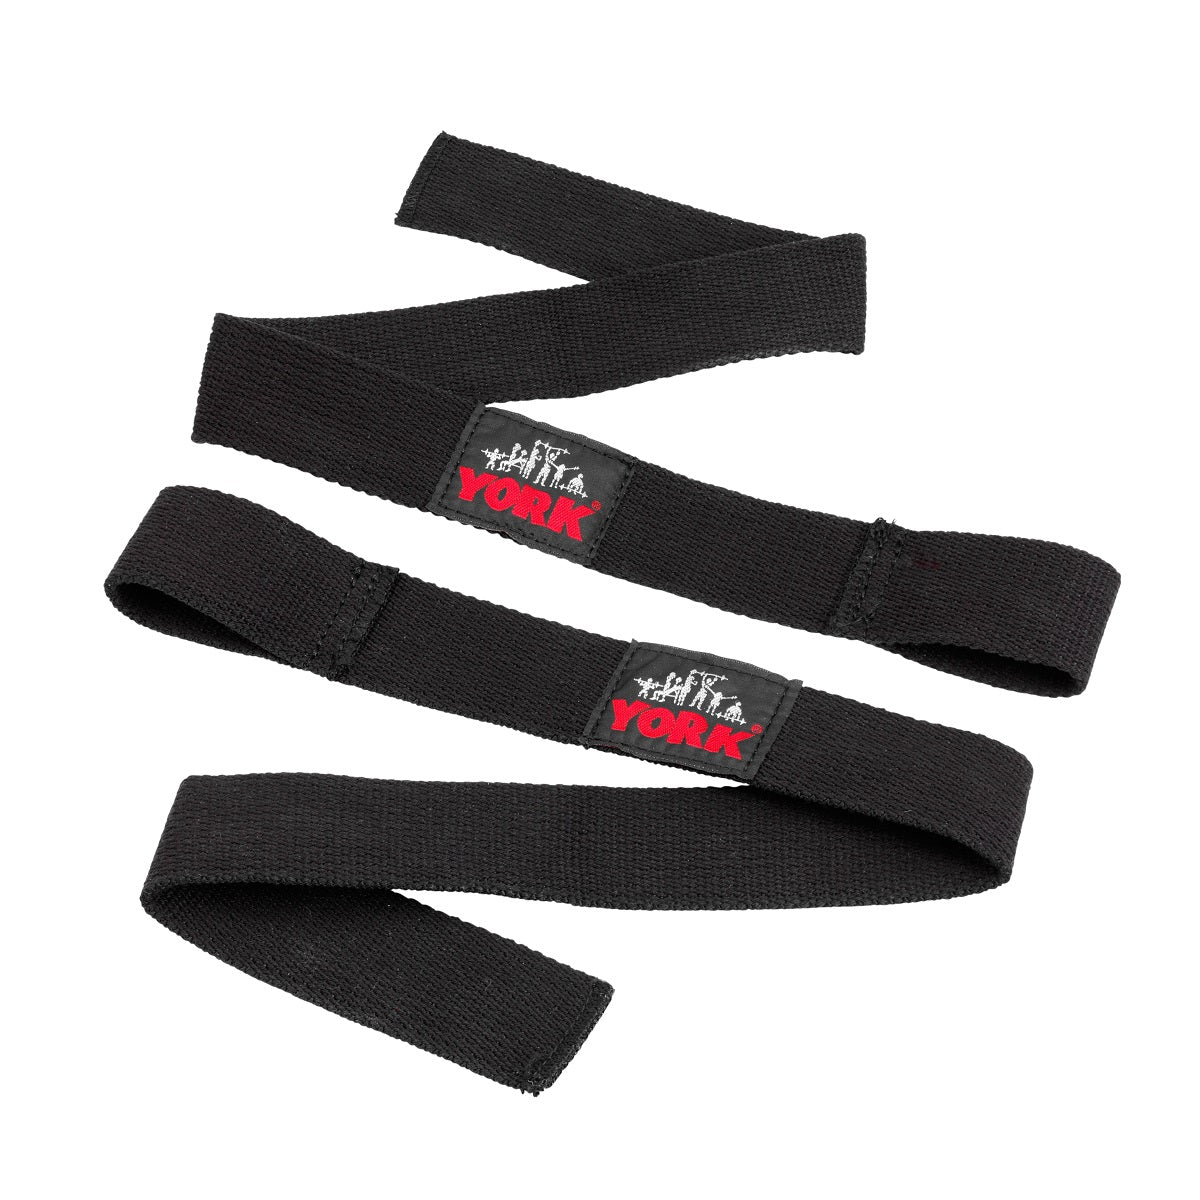 York Fitness Weightlifting Straps, Weightlifting Accessories